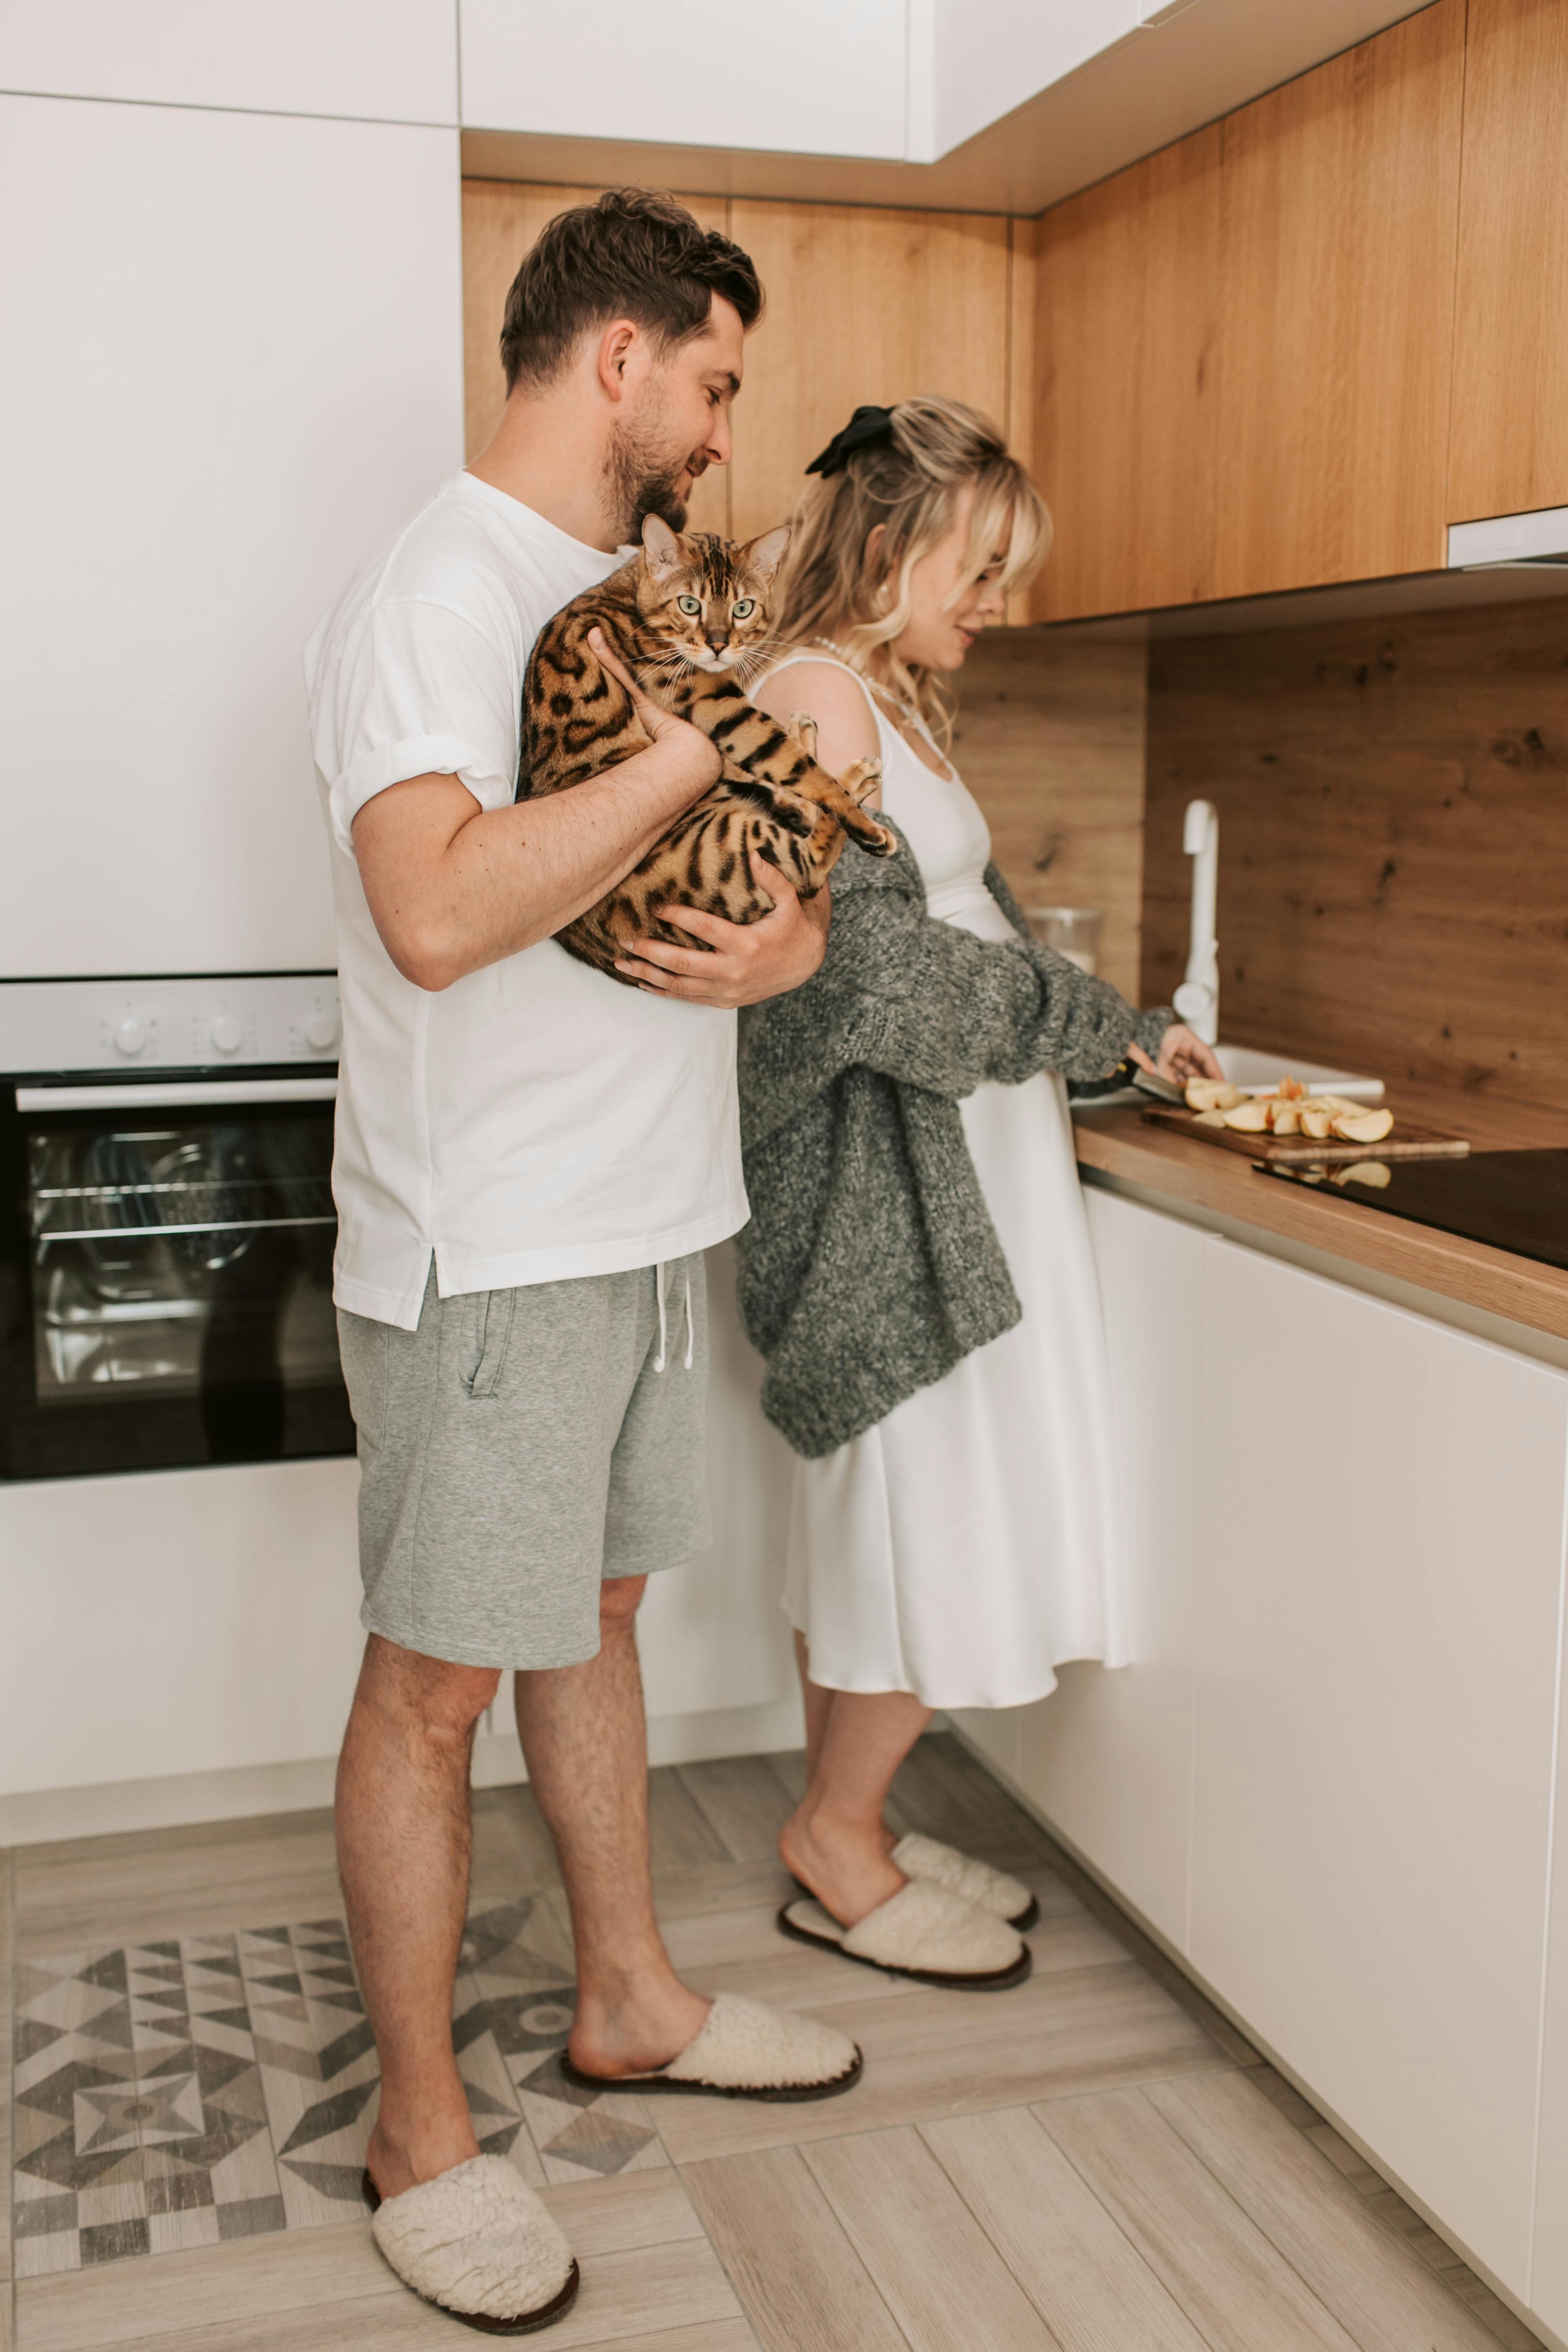 A couple in the kitchen with their cat | Source: pexels